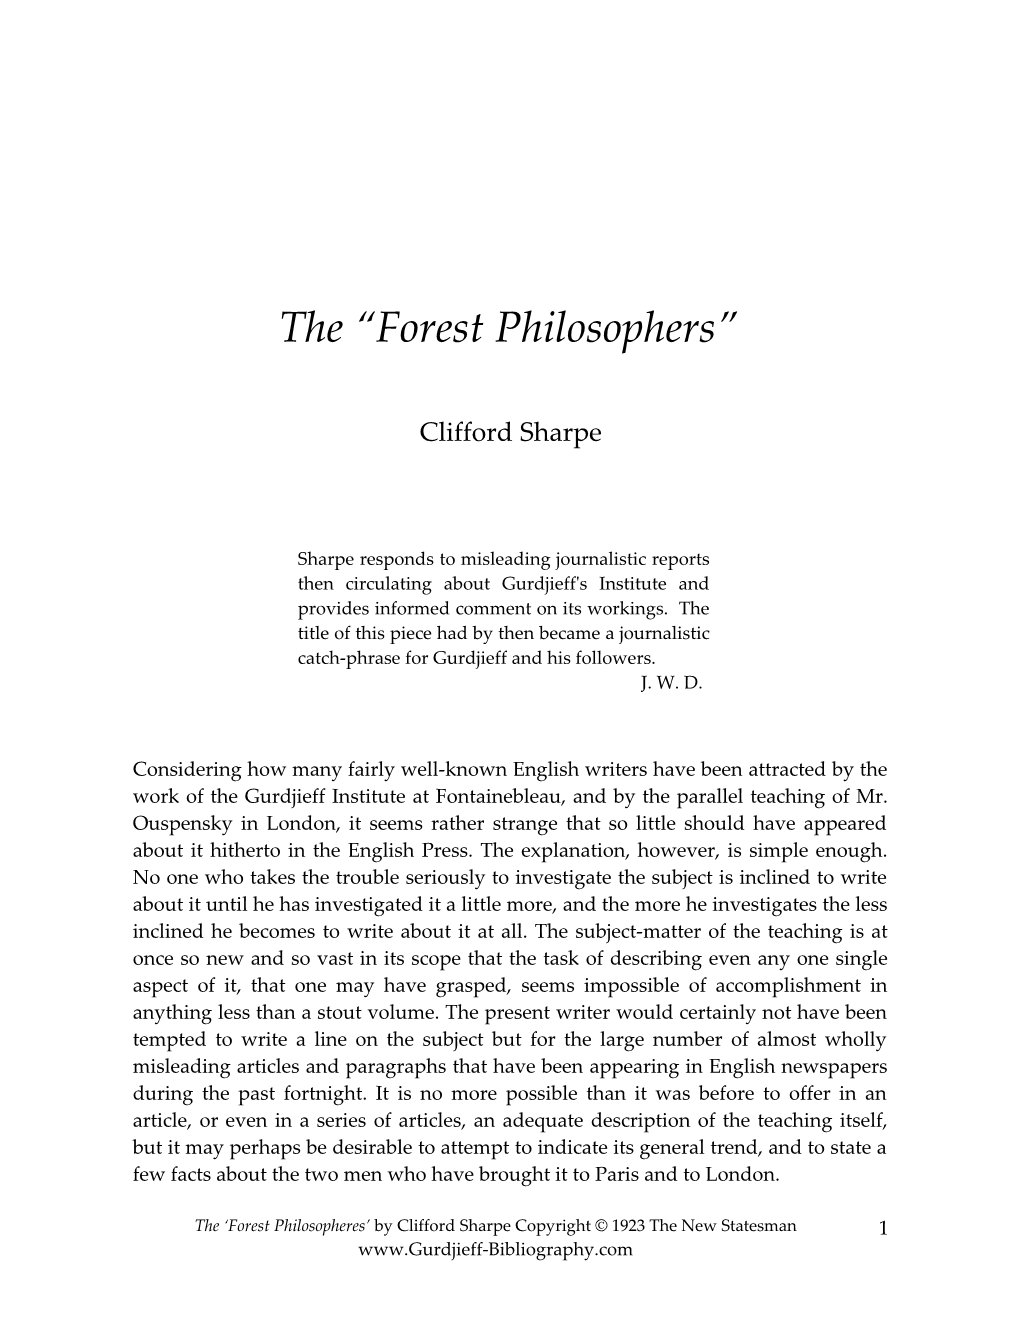 The Forest Philosophers